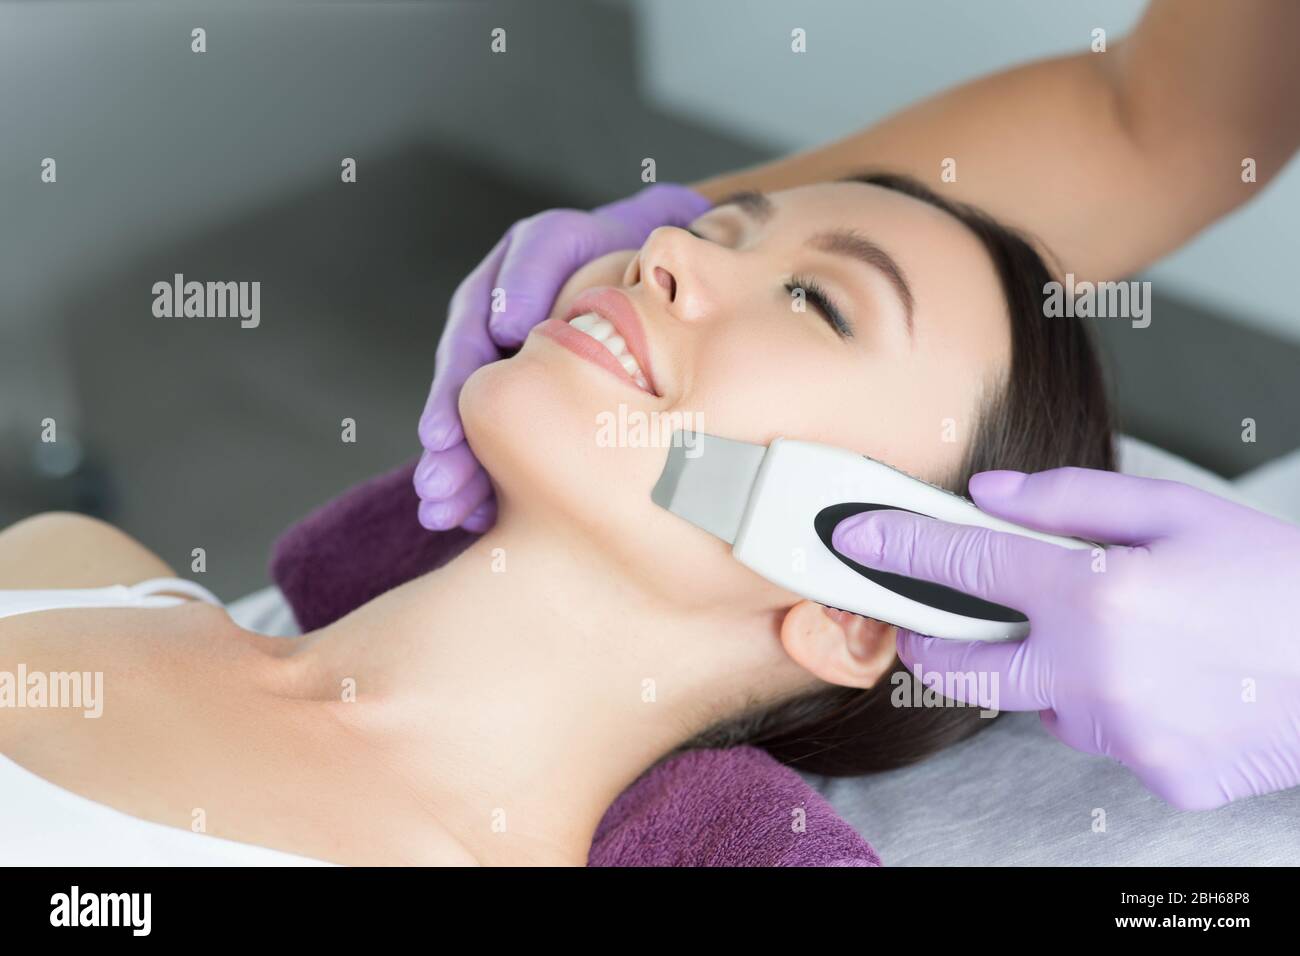 woman receiving ultrasound cavitation facial peel. get clean face without blackheads and skin defects using ultrasound equipment Stock Photo